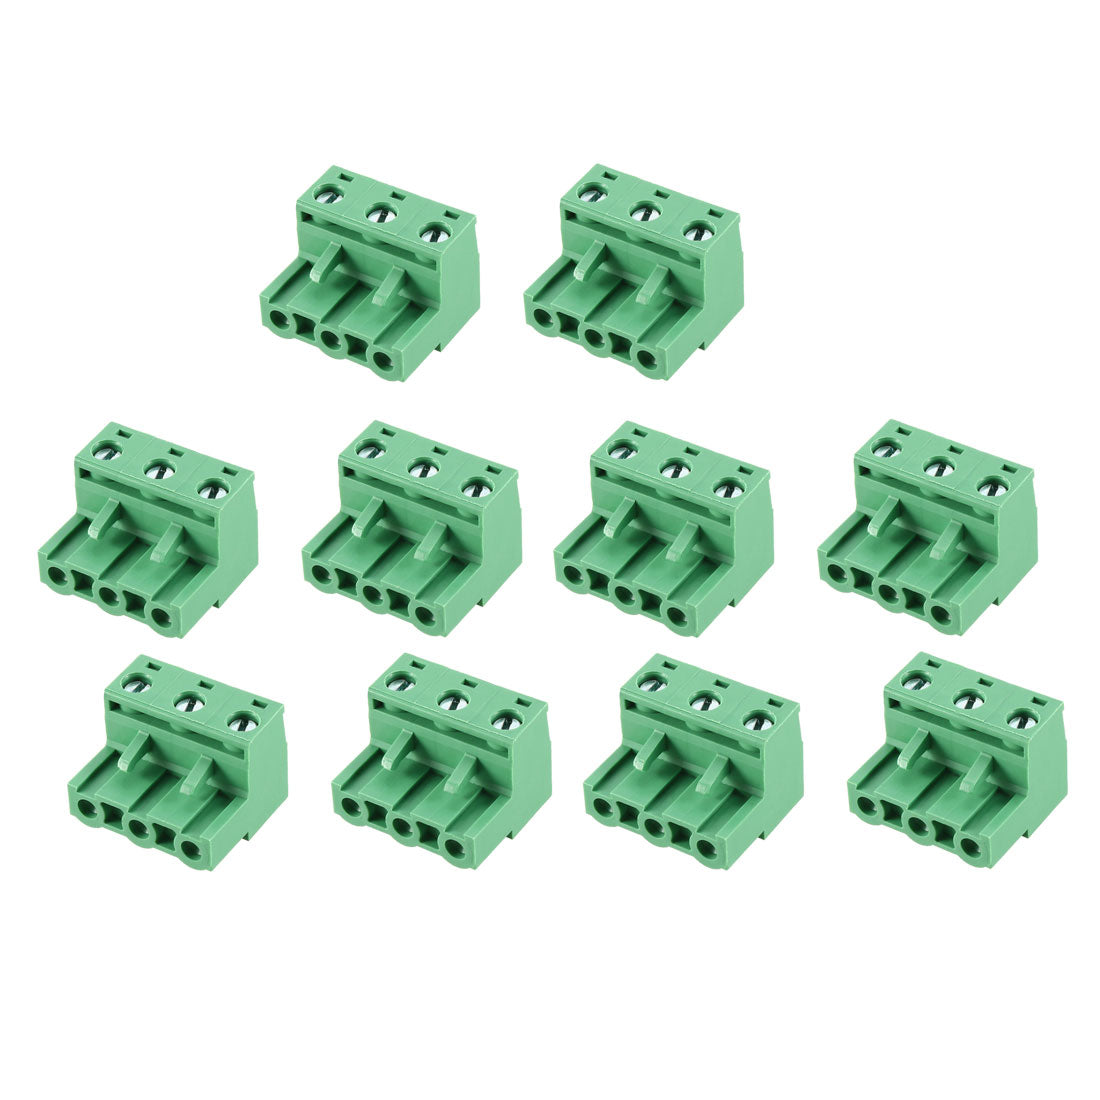 uxcell Uxcell 10Pcs AC300V 15A 7.62mm Pitch 3P Flat Angle Needle Seat Insert-In PCB Terminal Block Connector green